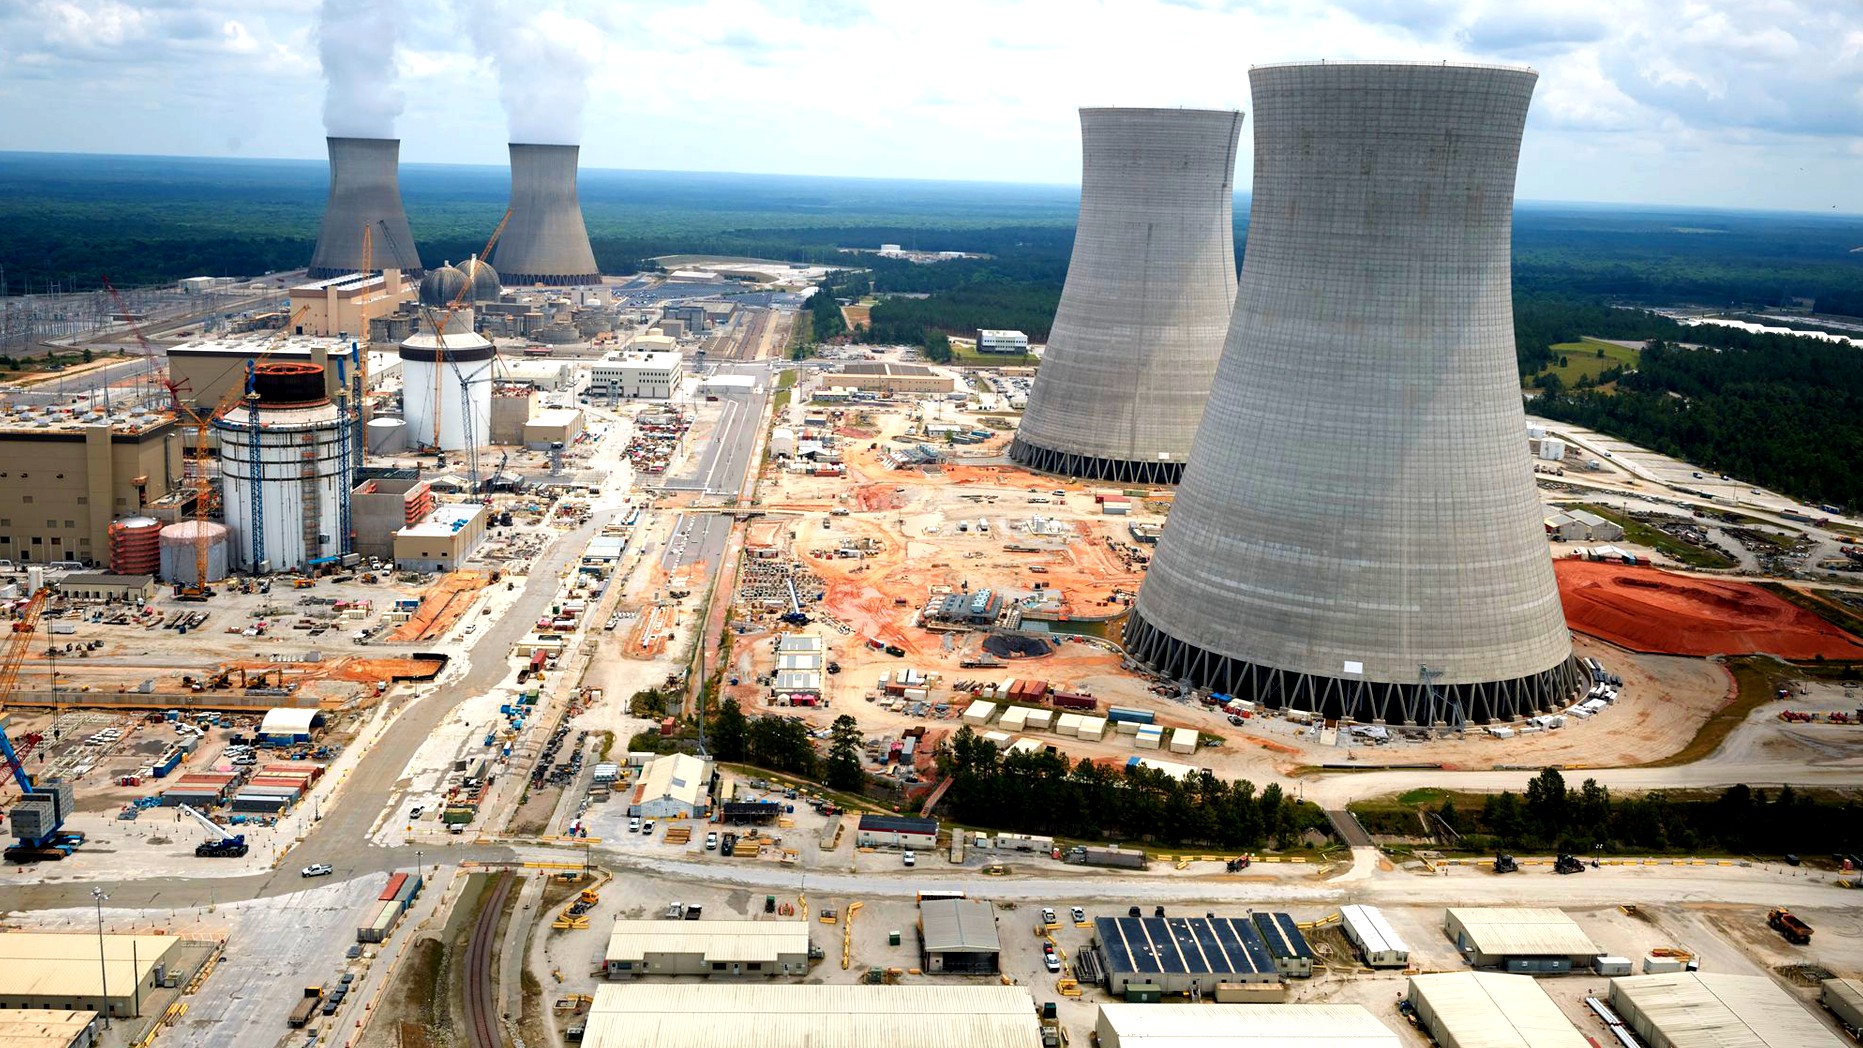 Costs have doubled to $28.5B for Plant Vogtle's 2 new units